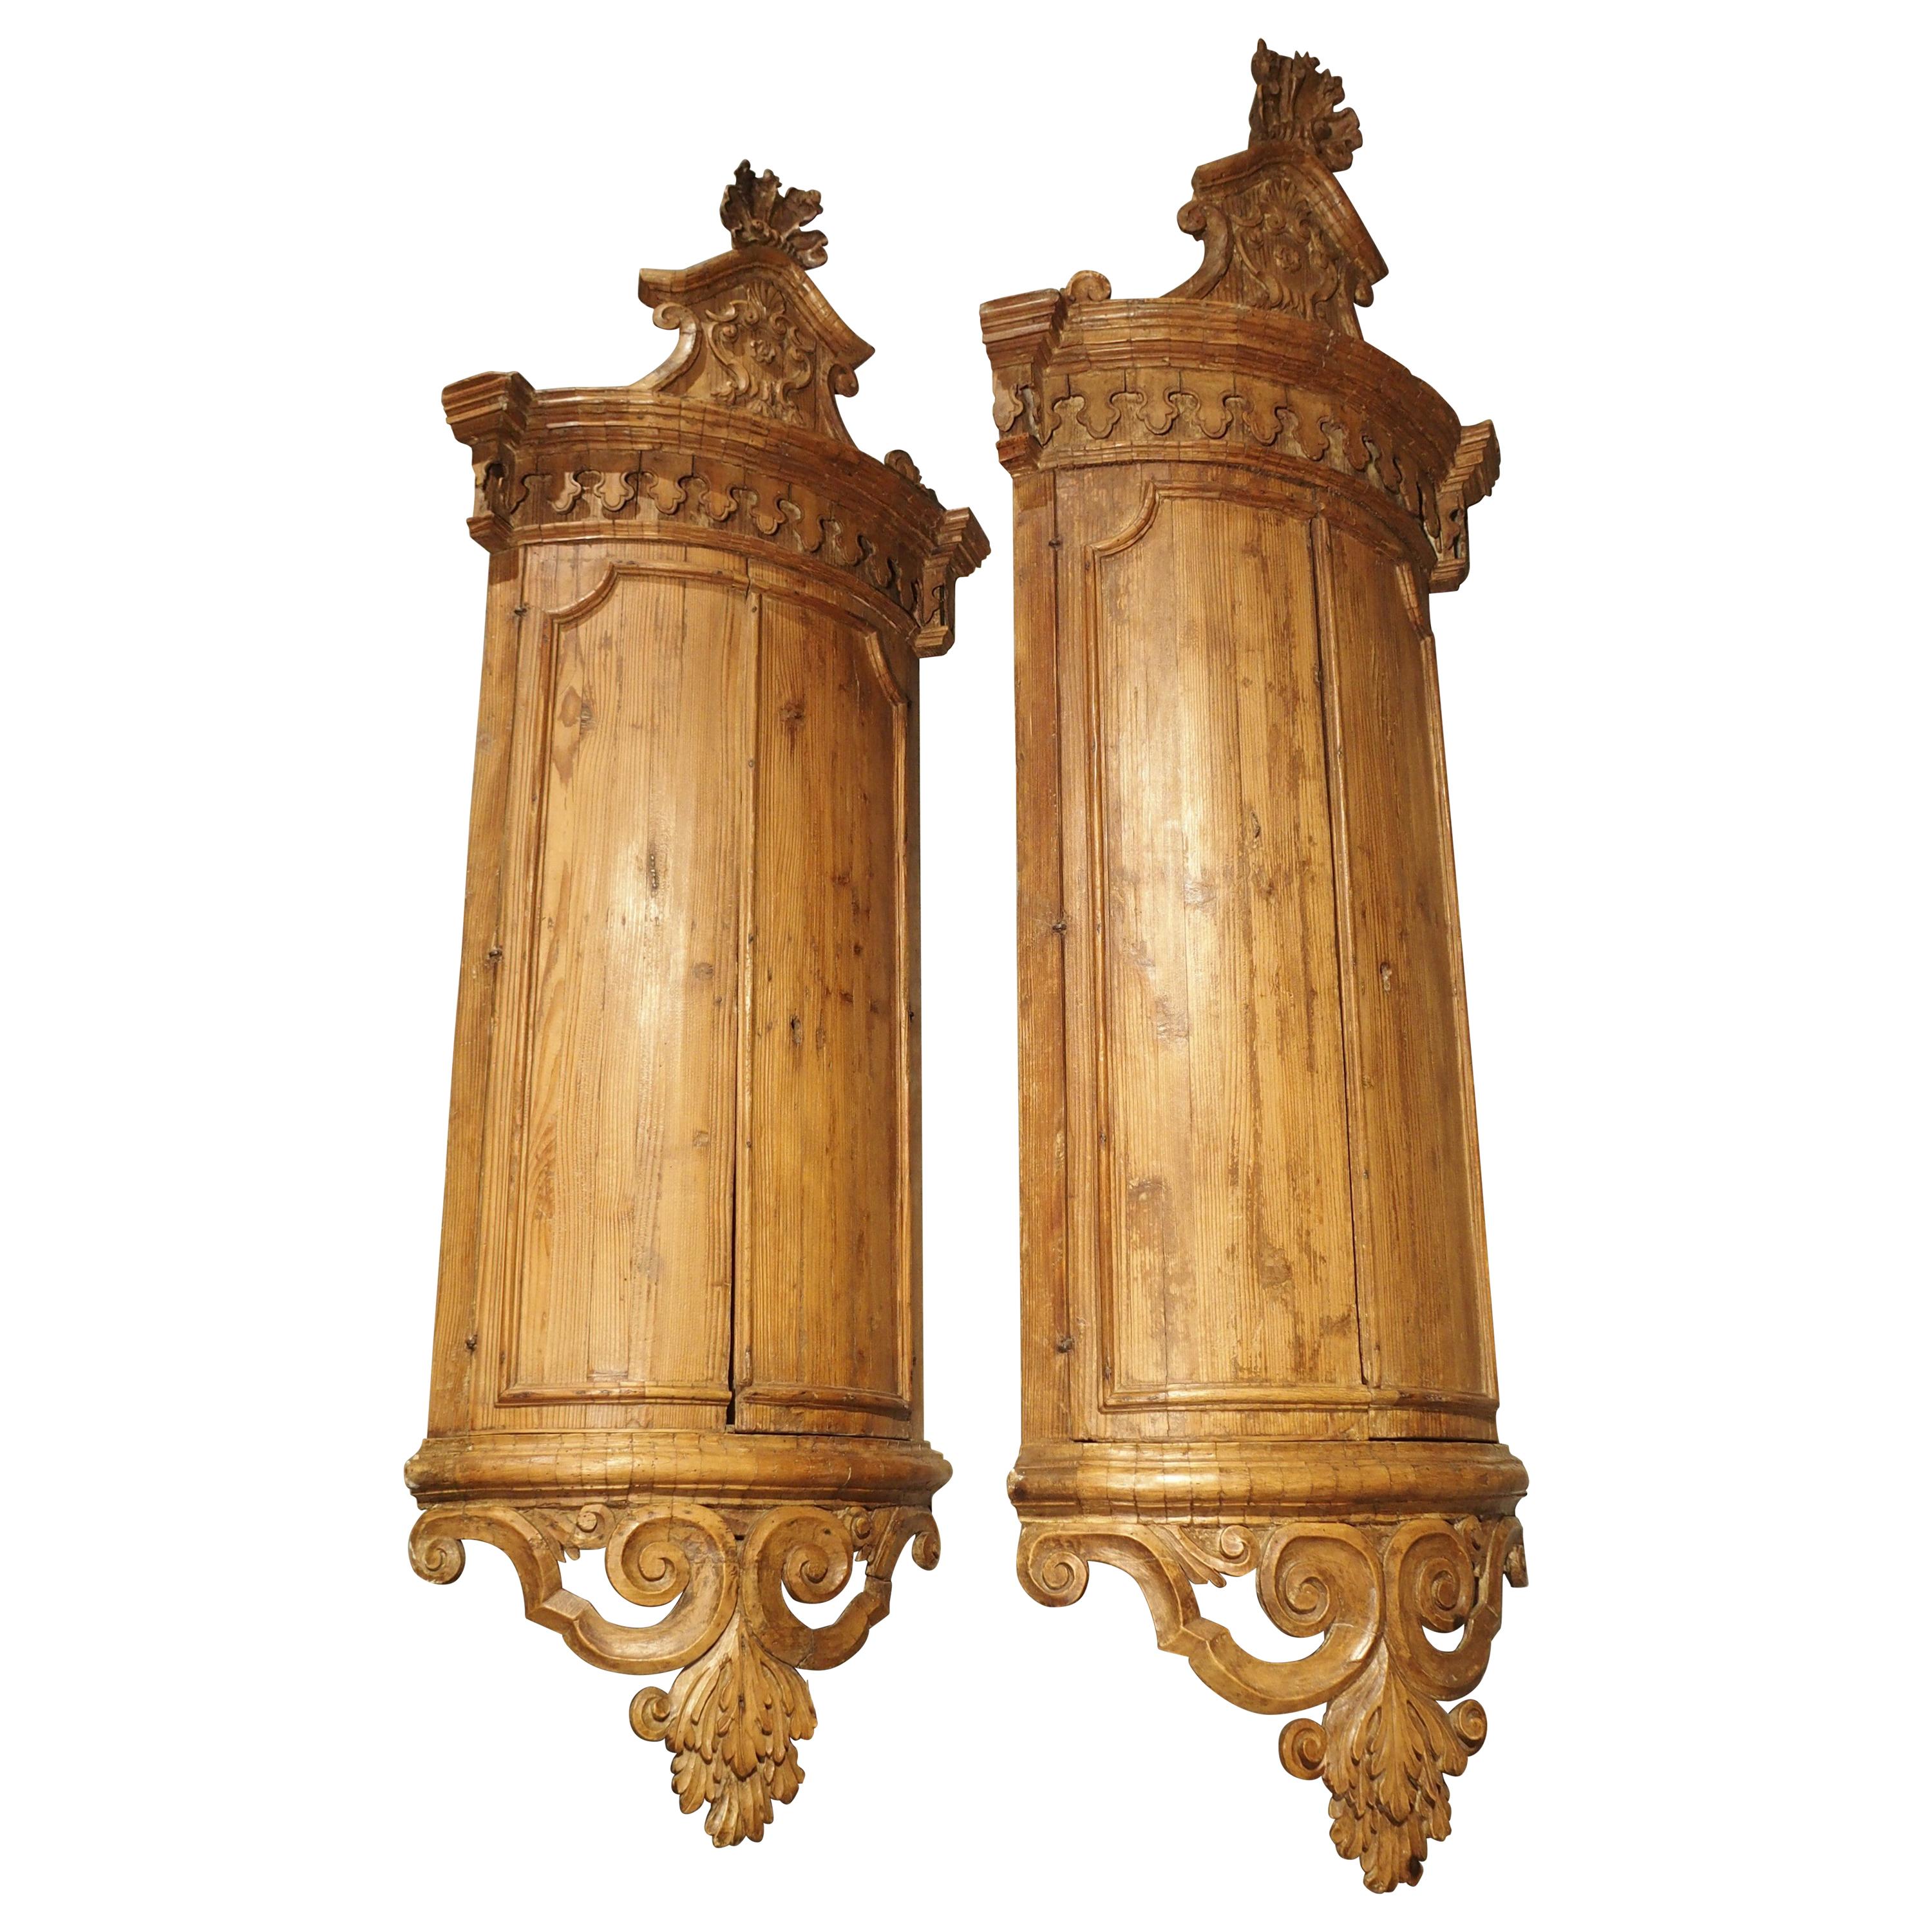 Rare Pair of 18th Century Hanging Corner Cupboards from Napoli, Italy